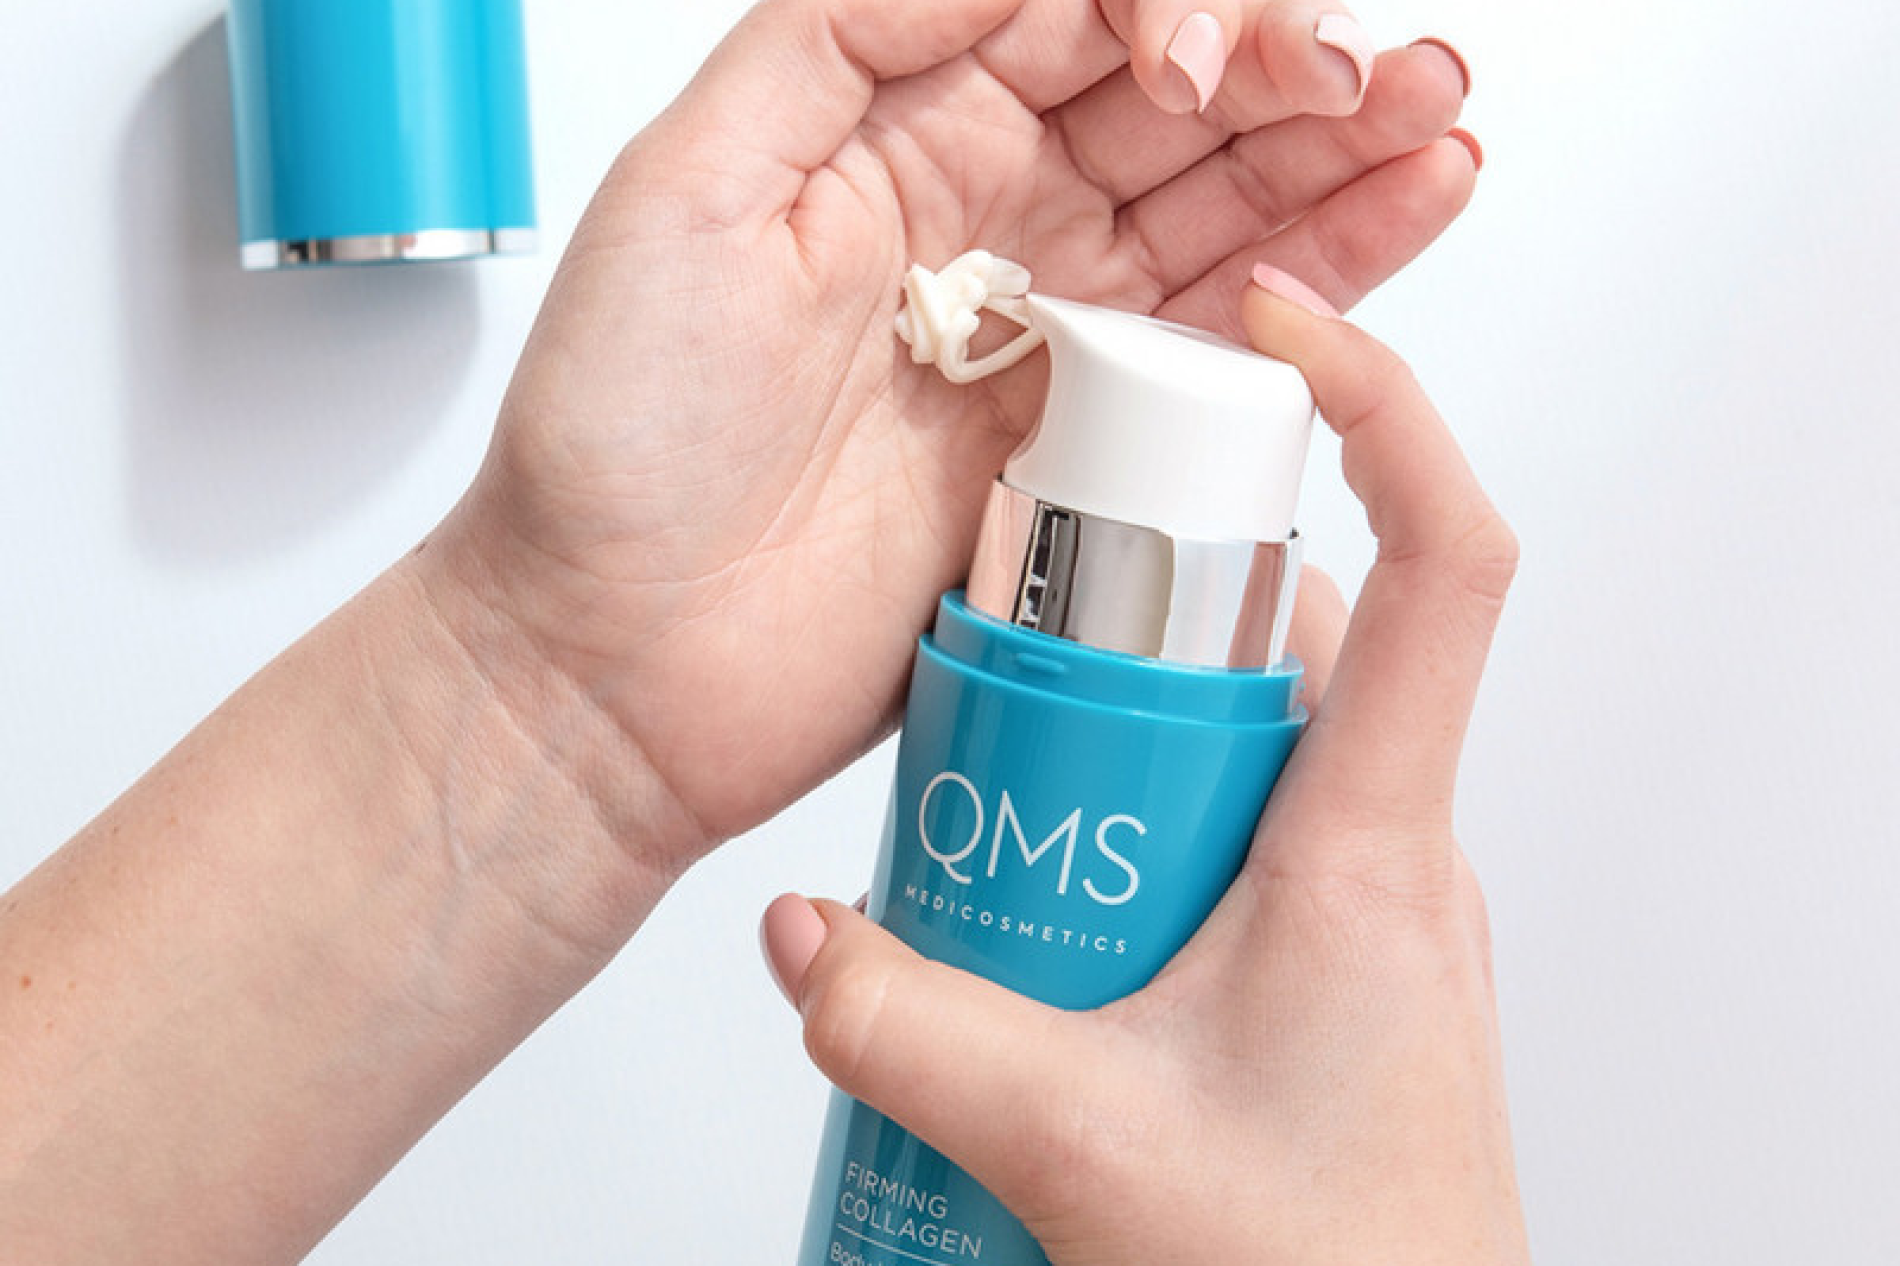 Model x QMS Firming Collagen Lotion